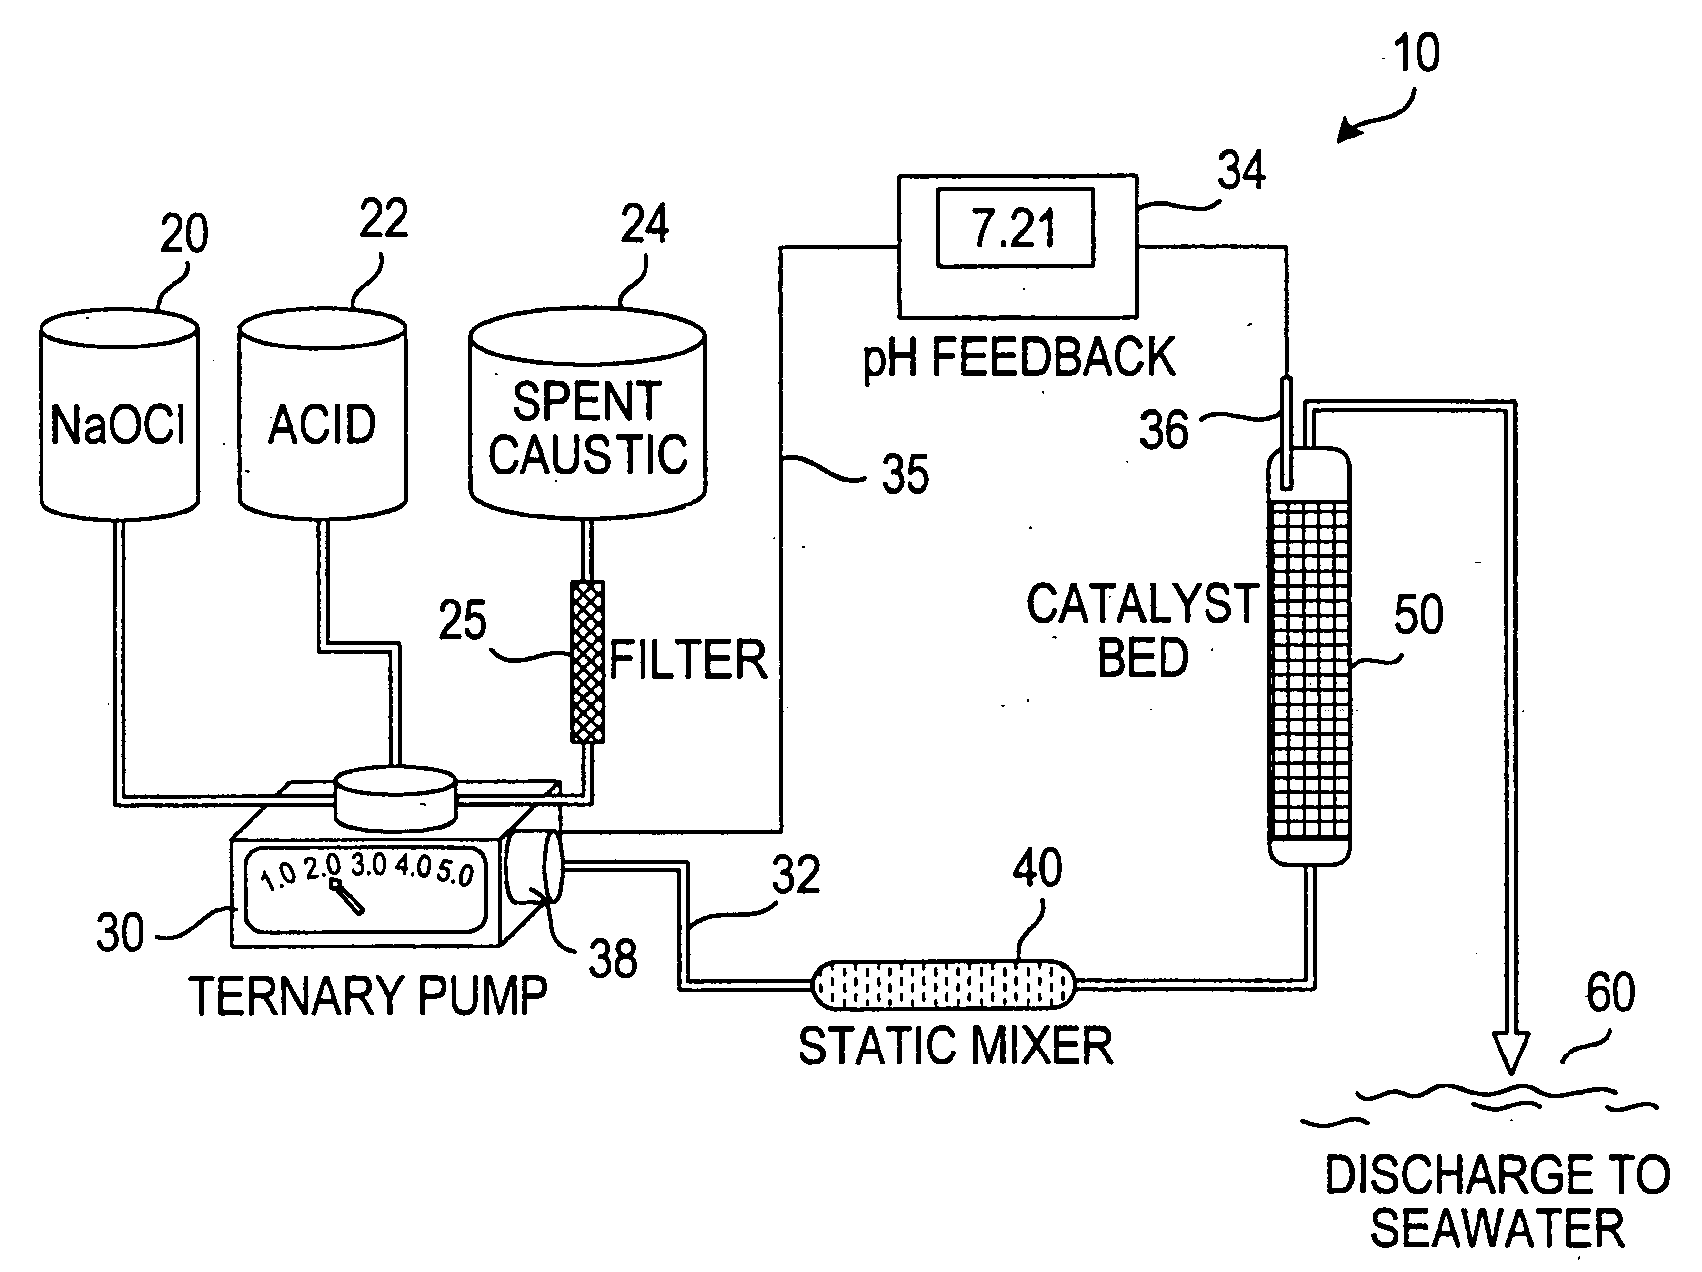 Process for treating a sulfur-containing spent caustic refinery stream using a membrane electrolyzer powered by a fuel cell